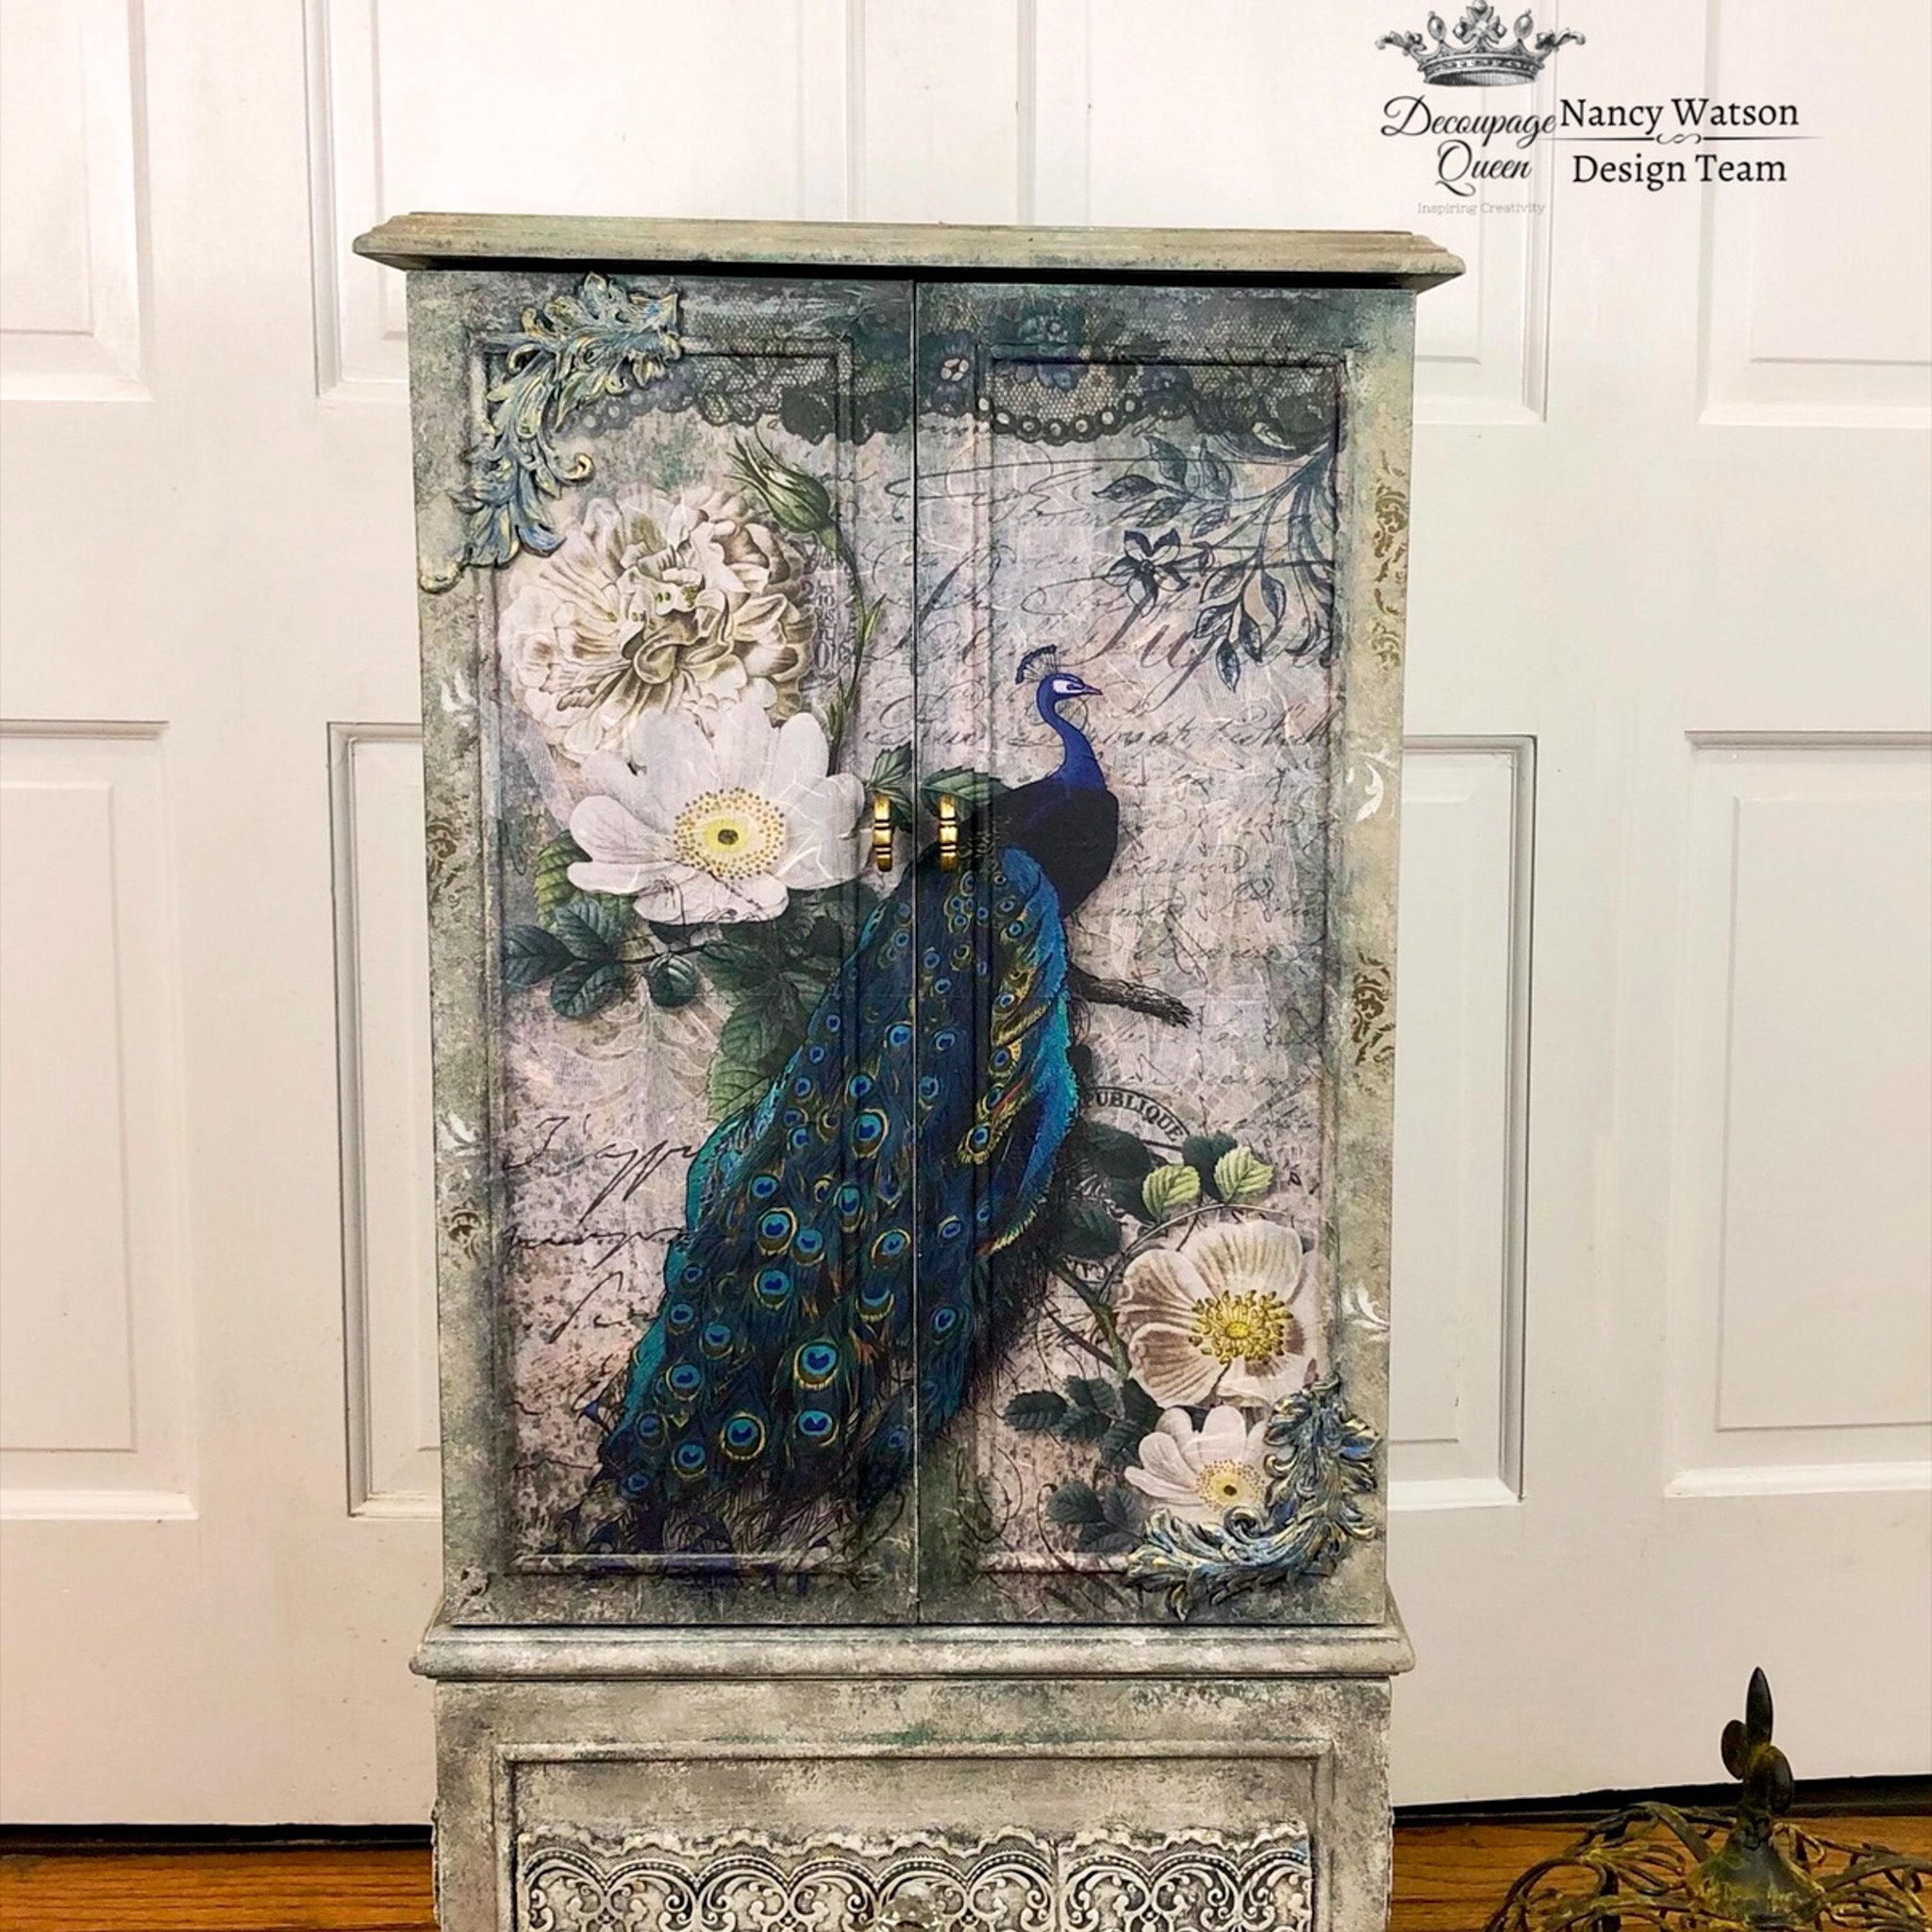 Rustic dresser with the Peacock Majesty decoupage paper on top. A Decoupage Queen and Nancy Watson Design Team logo on the top right.